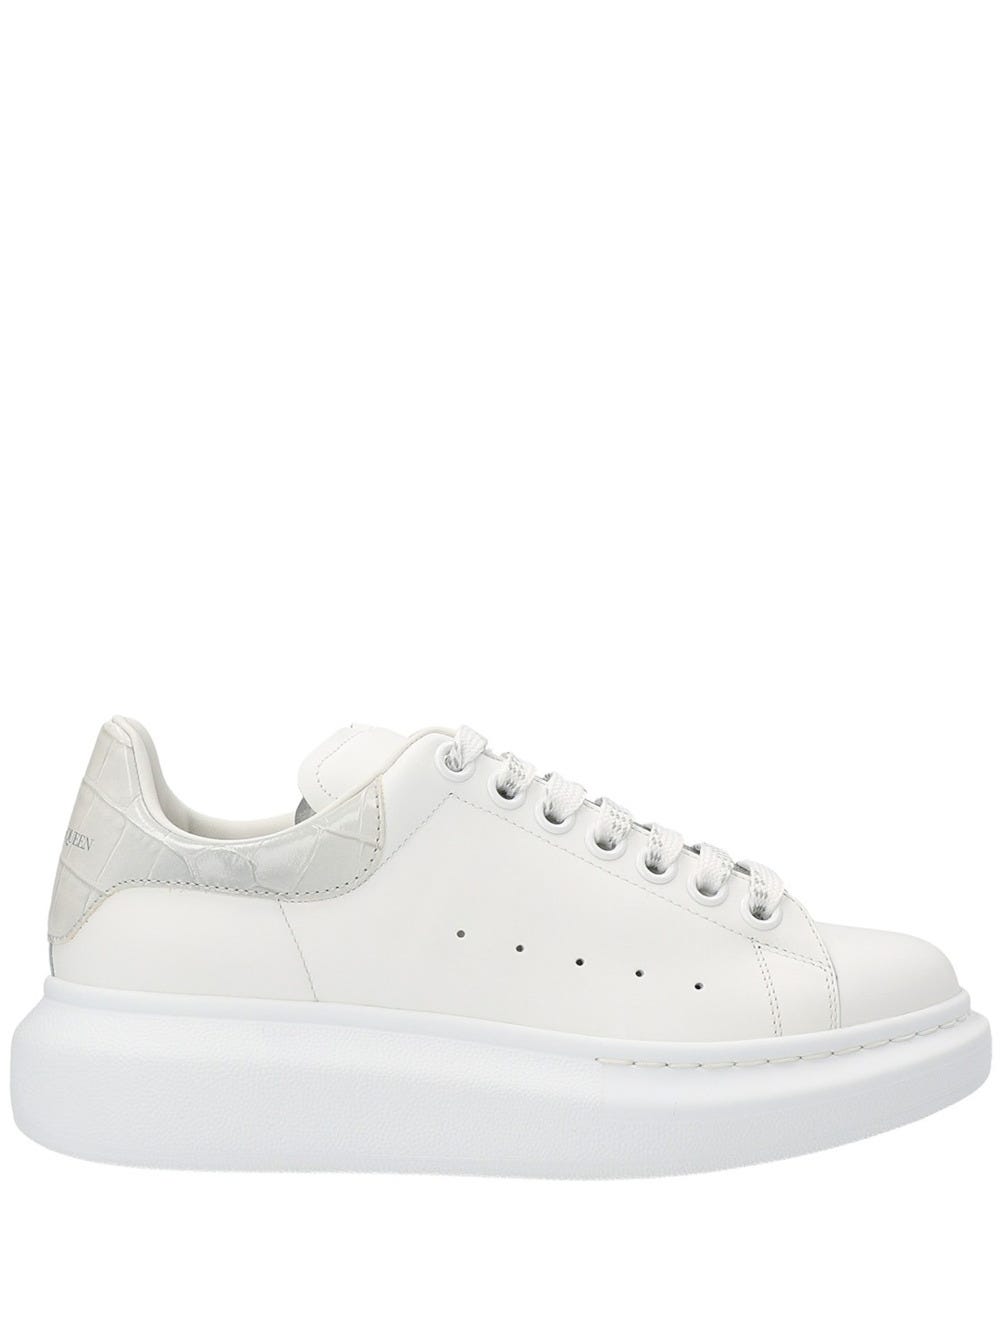 ALEXANDER MCQUEEN OVERSIZED SNEAKERS WITH WHITE CROCODILE EFFECT DETAILING